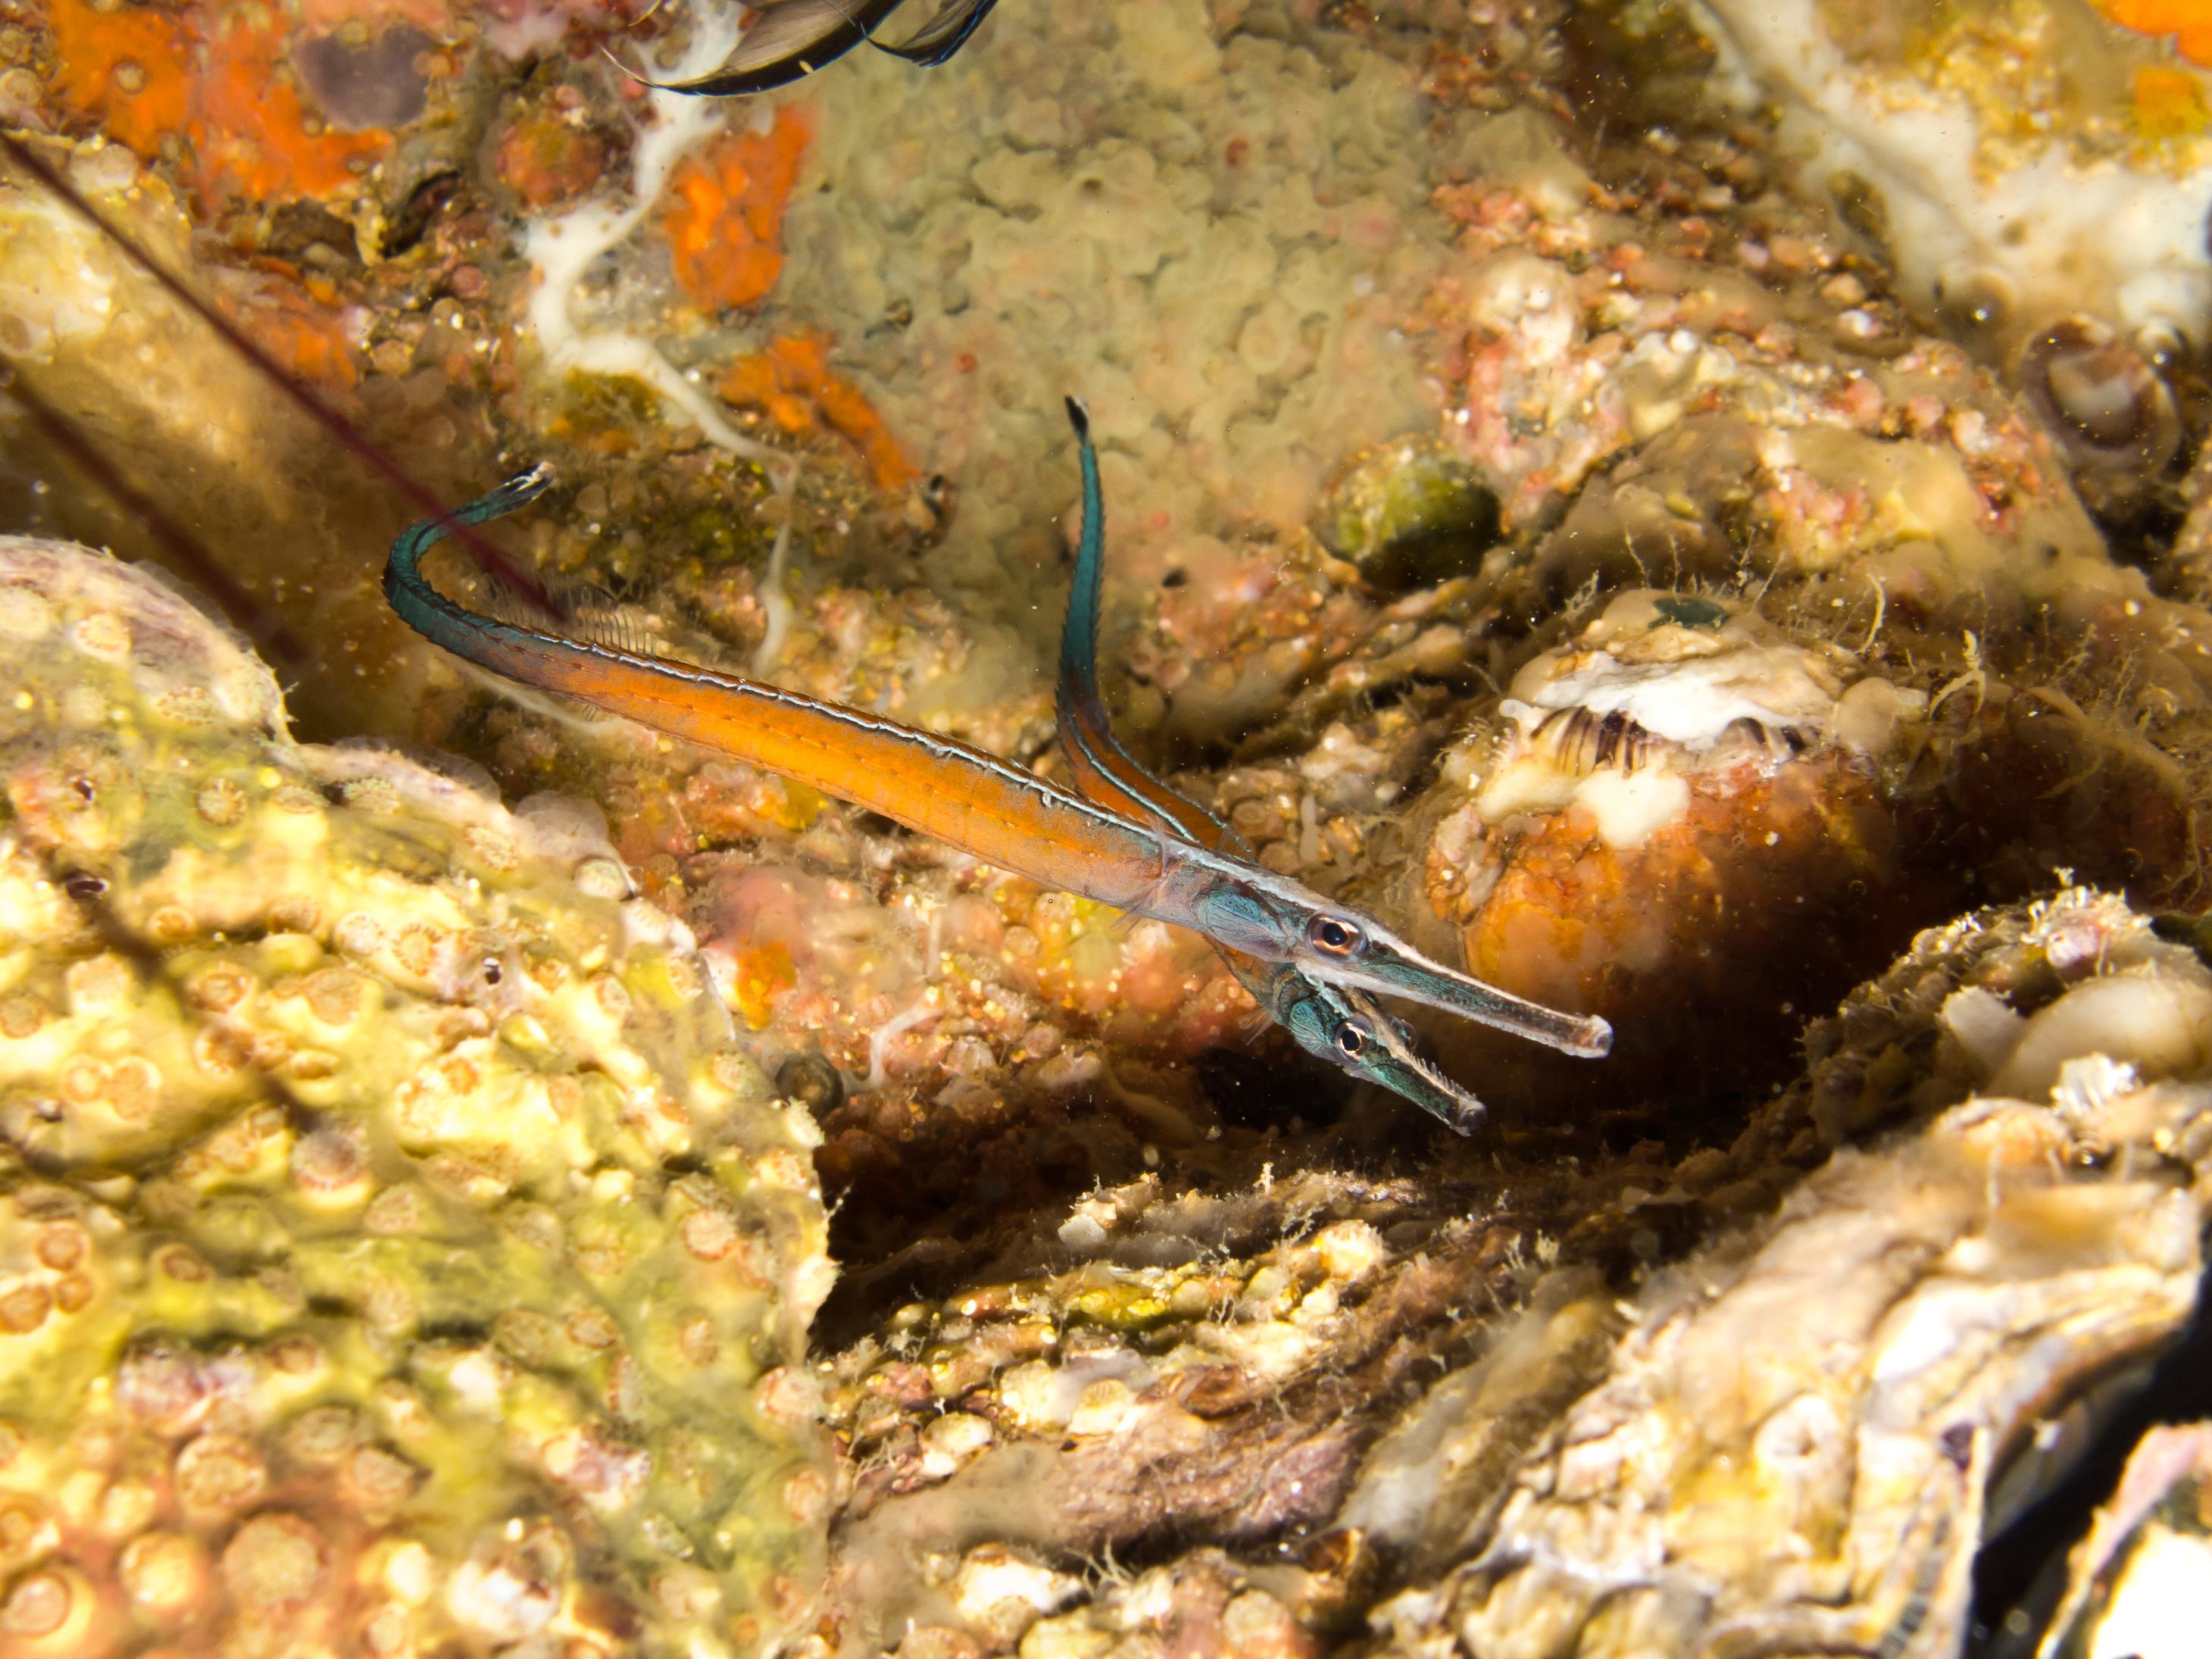 An image of a Janss' pipefish